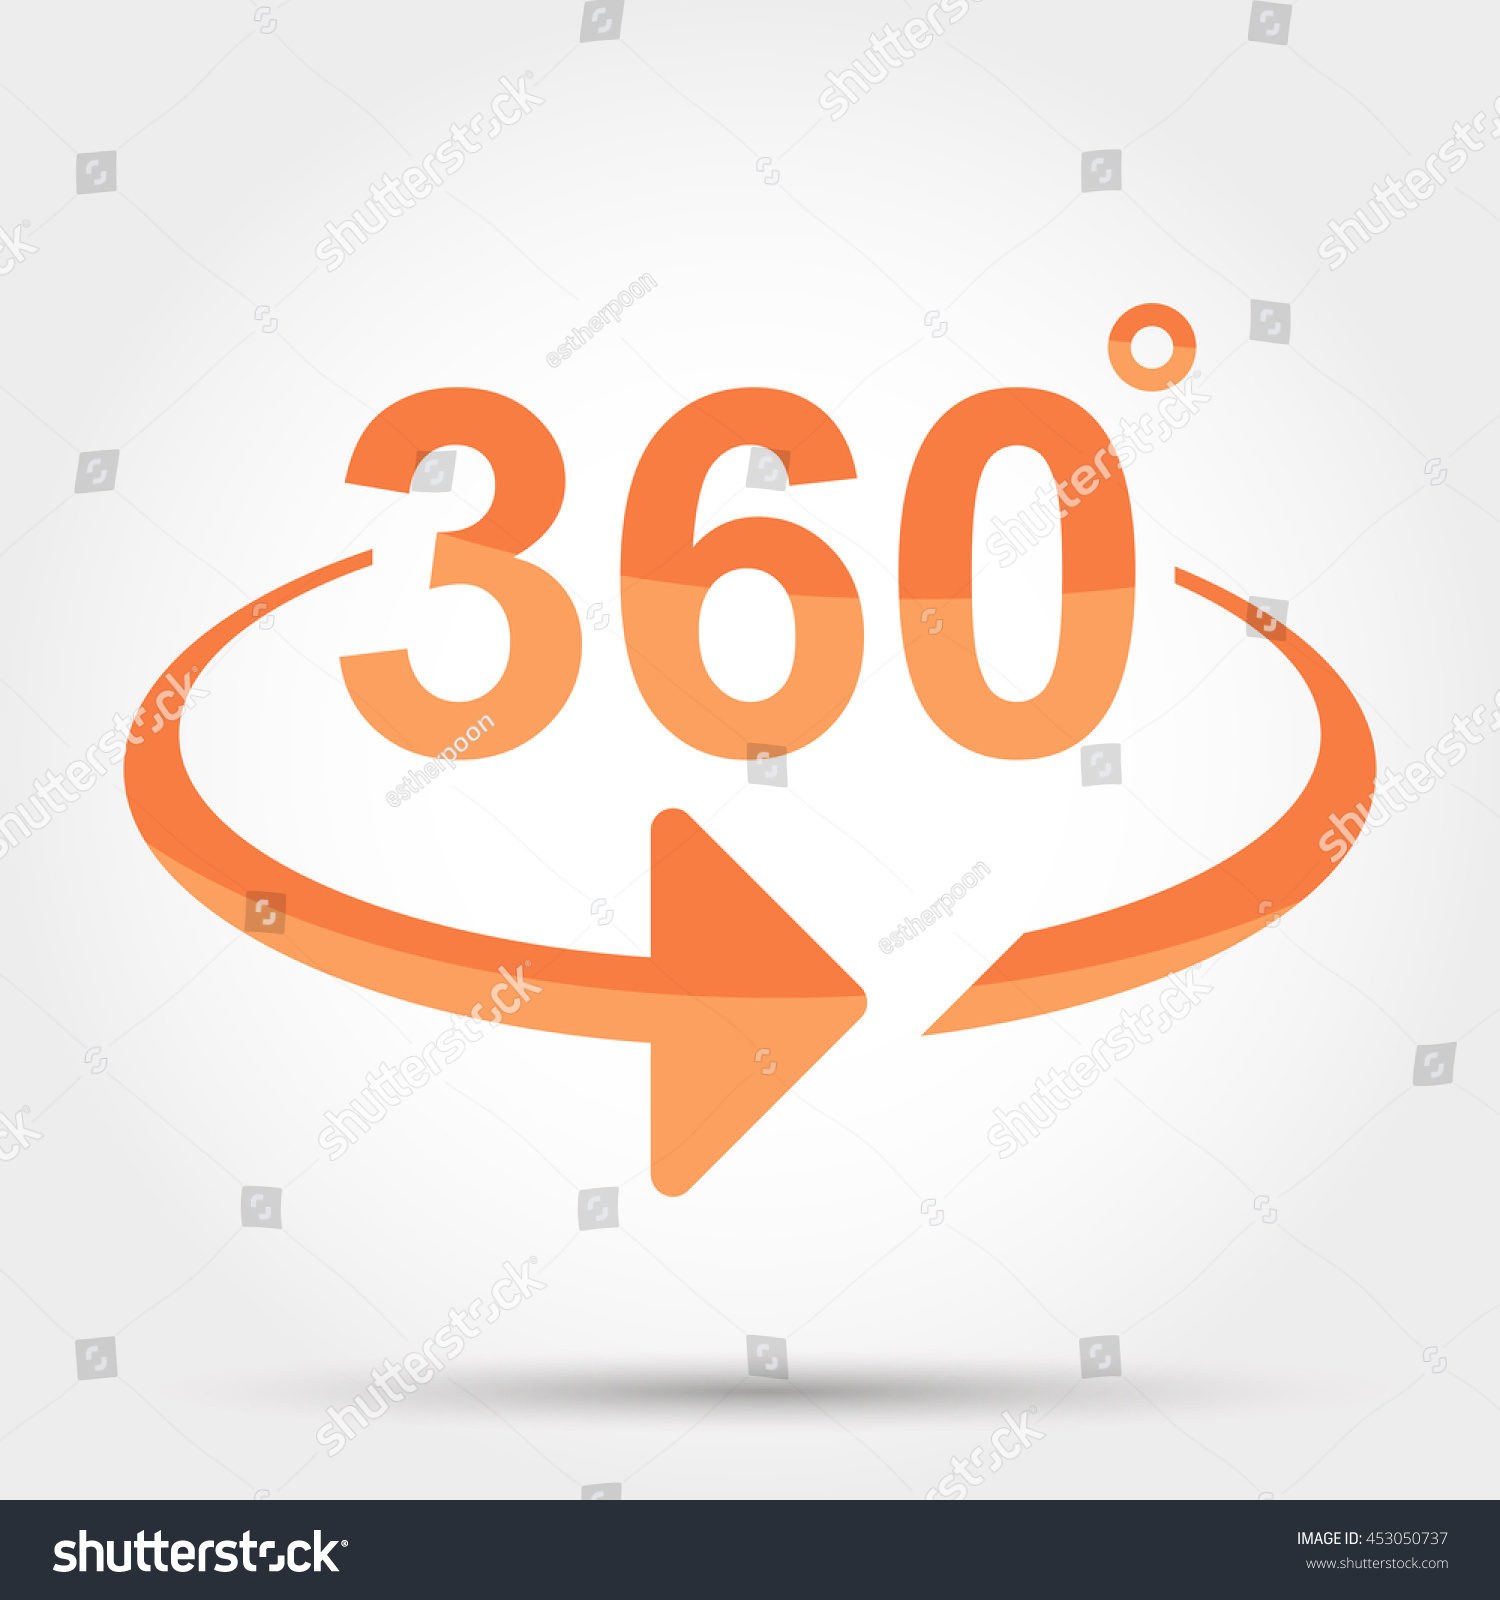 360-degrees-view-sign-icon-stock-vector-453050737-shutterstock